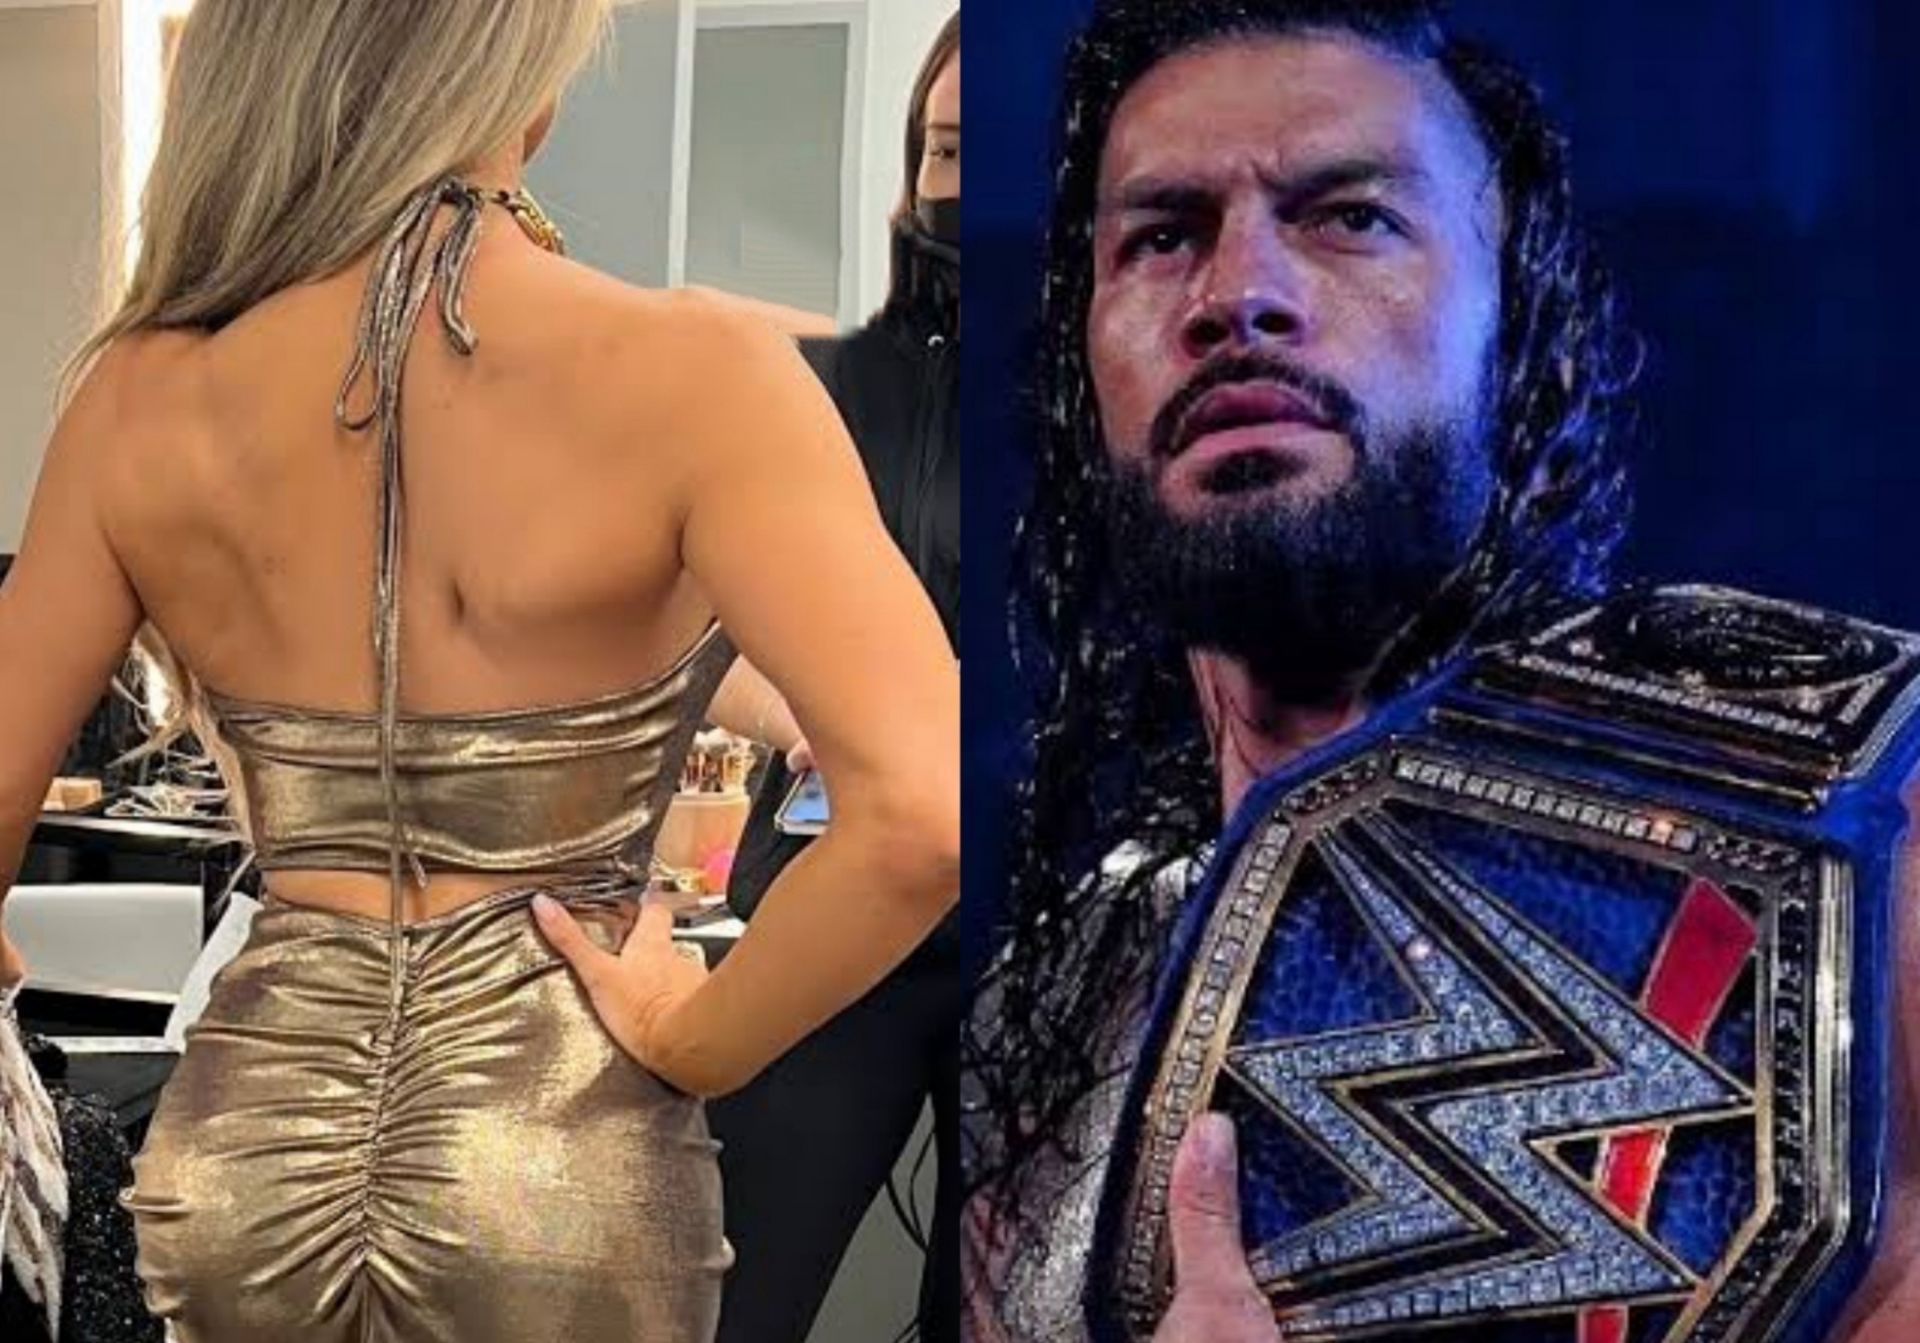 Which female WWE star did Roman Reigns acknowledge?